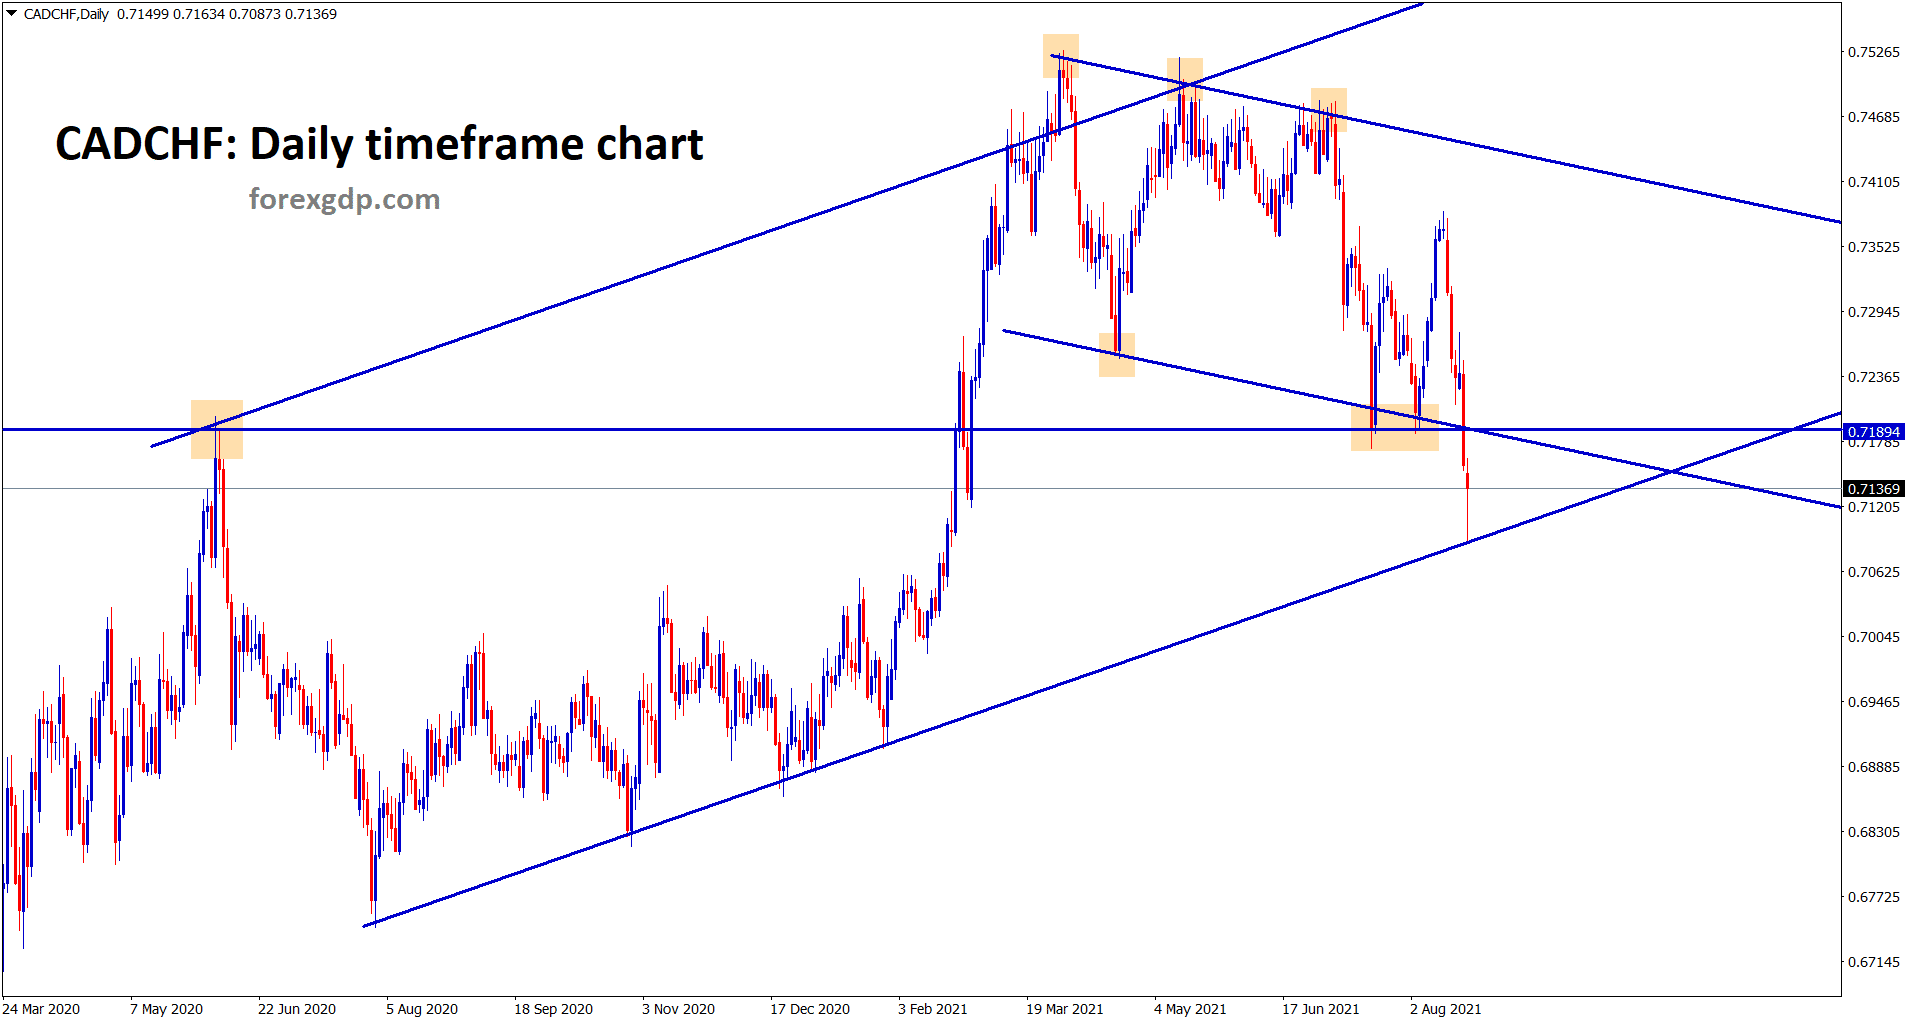 CADCHF hits the higher low of the bigger ascending channel